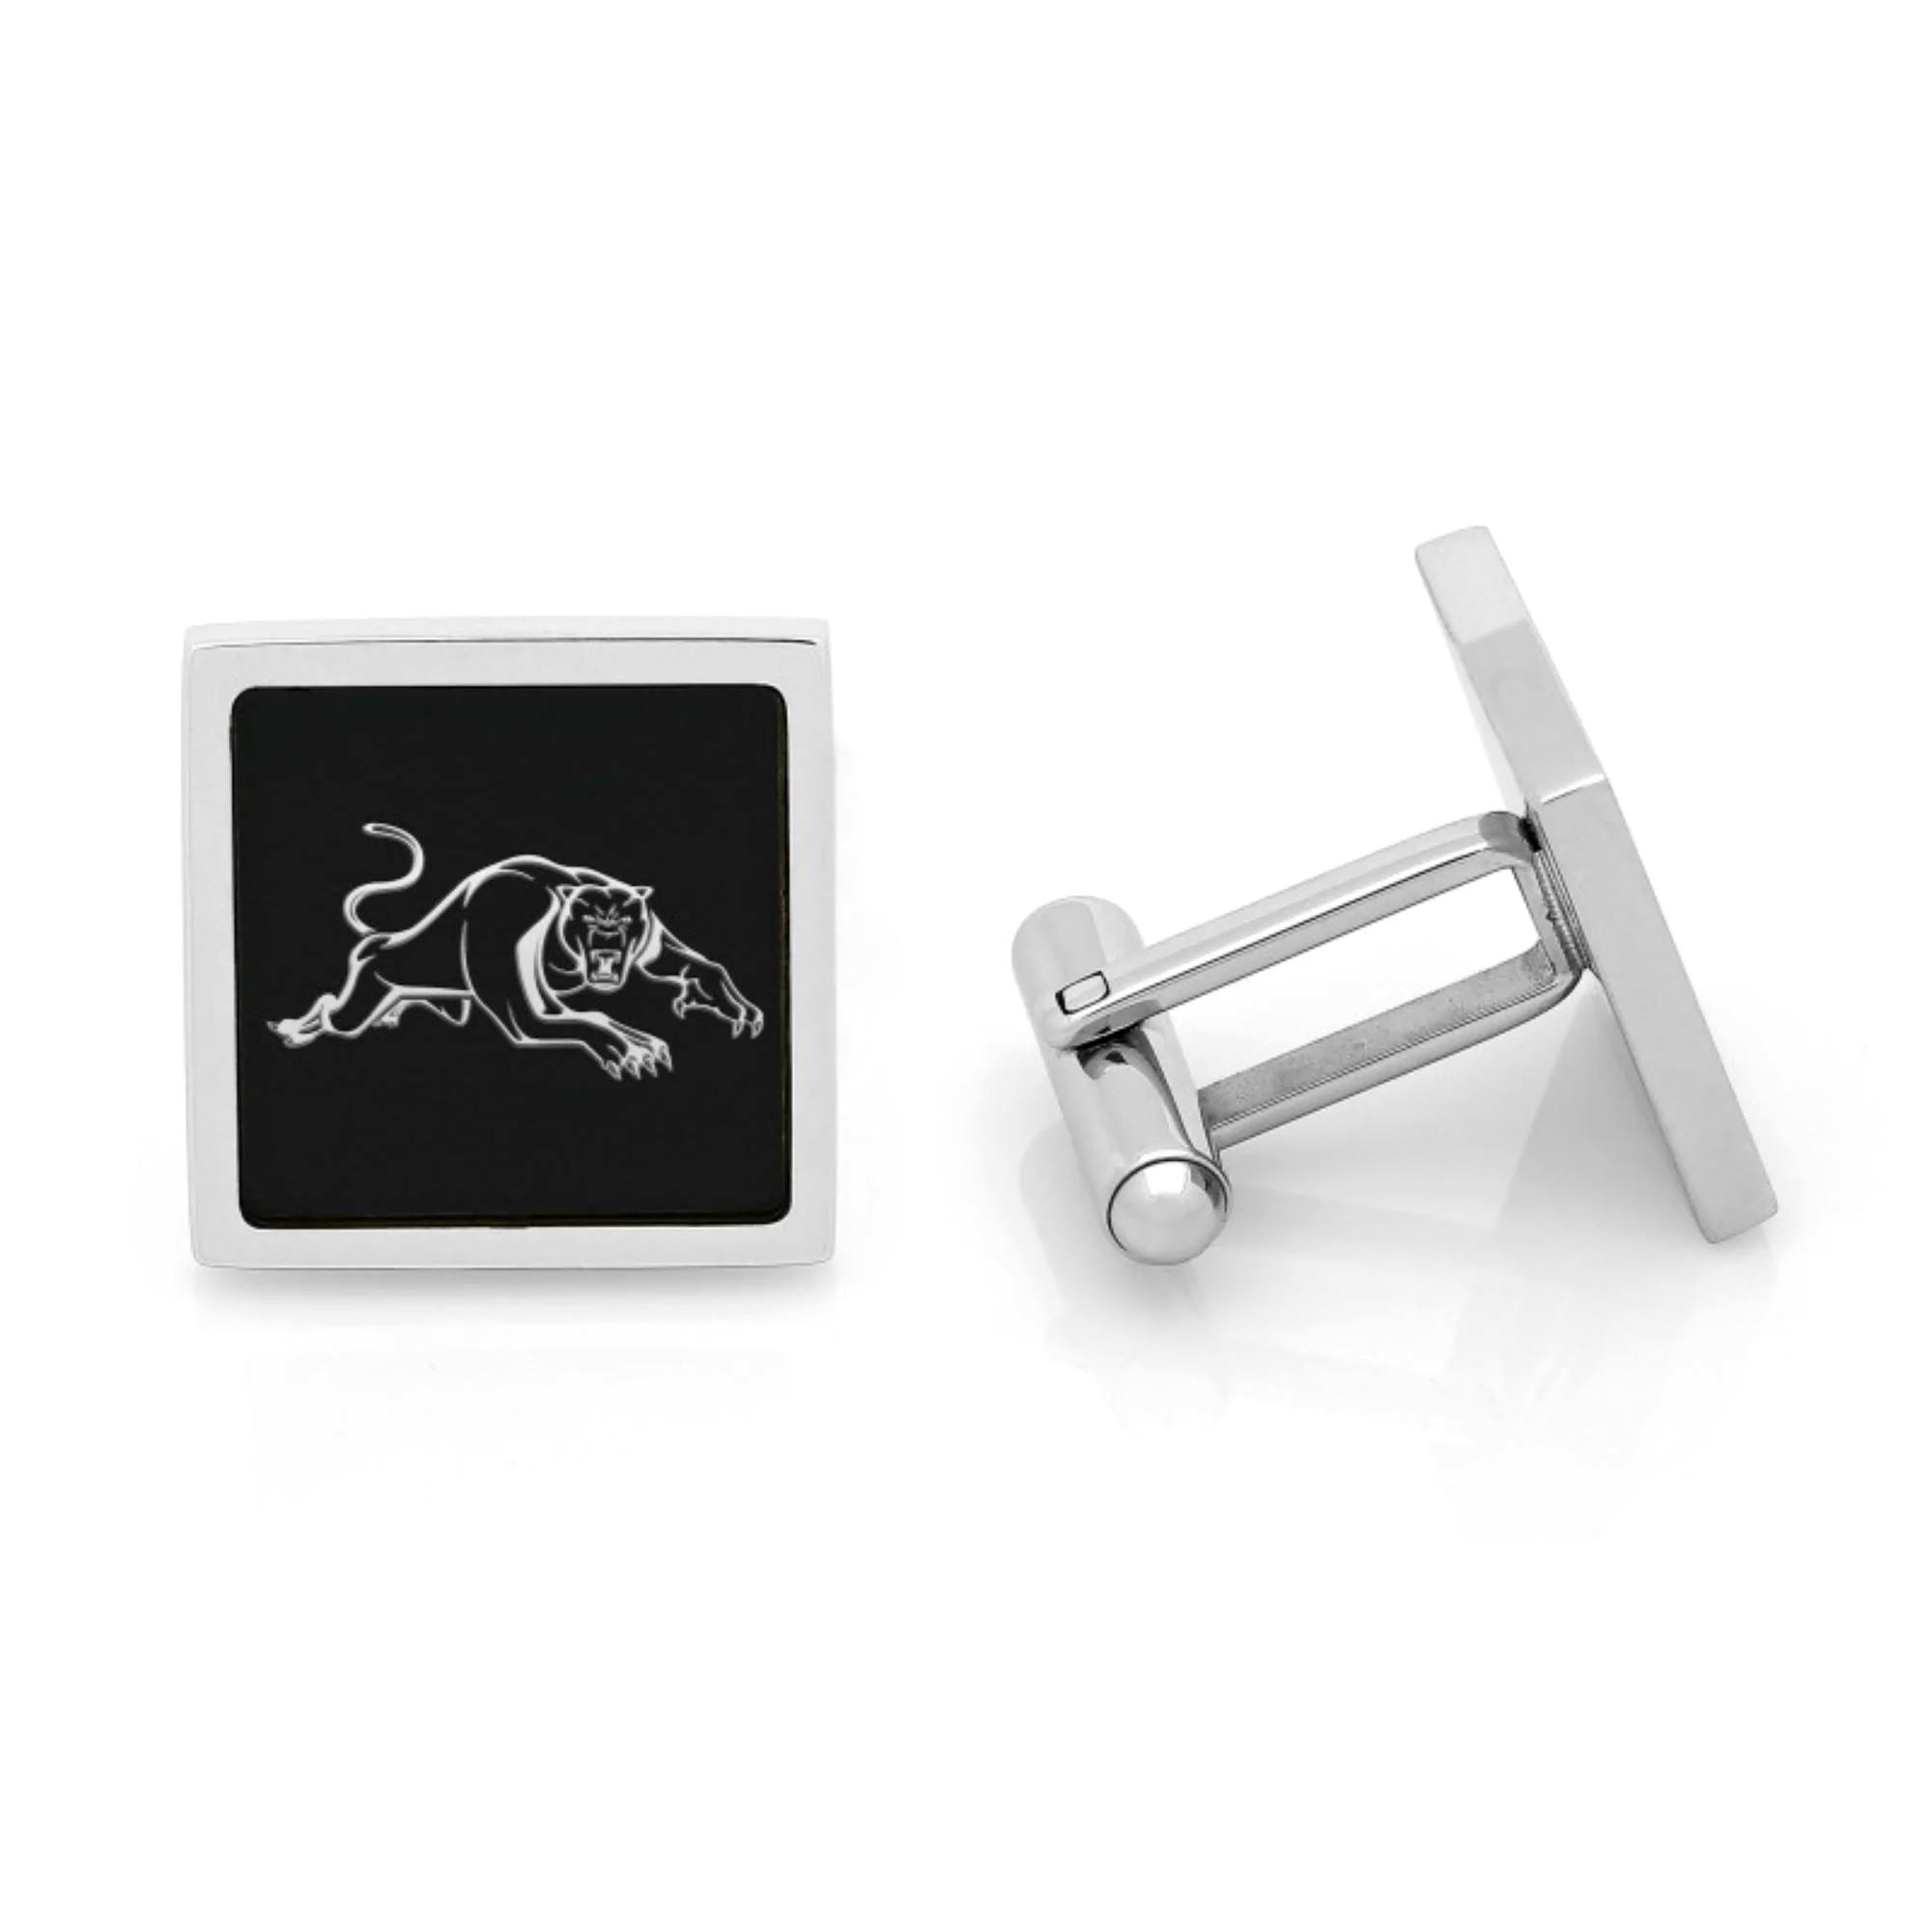 Penrith Panthers NRL Cufflinks Novelty Cufflinks NRL Penrith Panthers NRL Cufflinks 